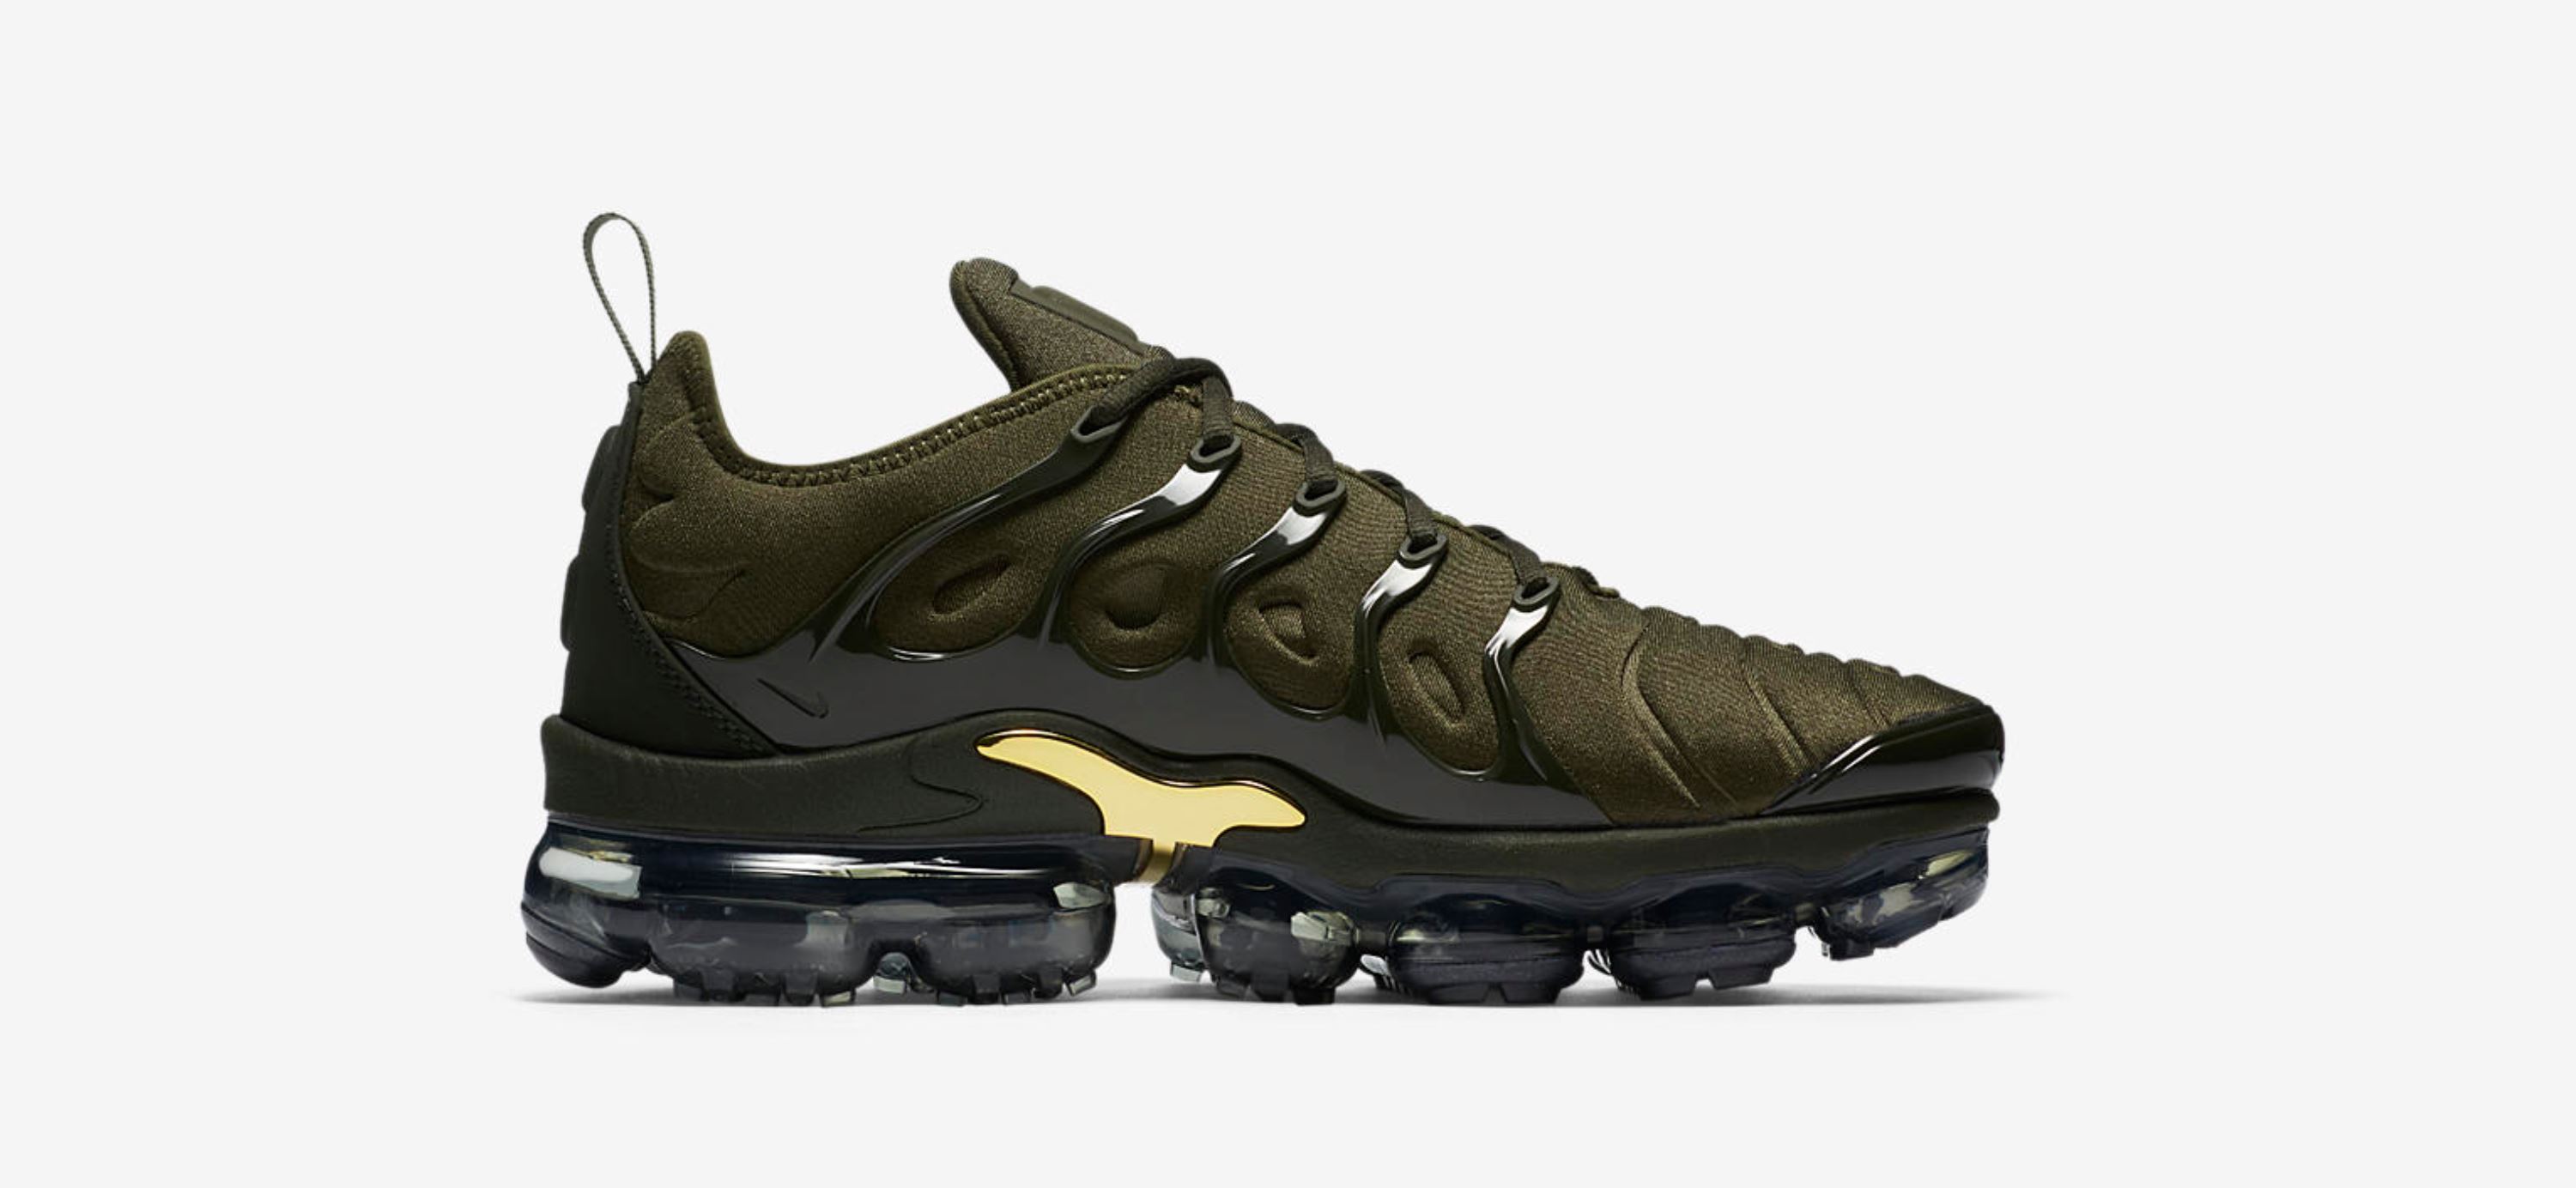 The Nike Air VaporMax Plus 'Olive' Drops Next Week - WearTesters